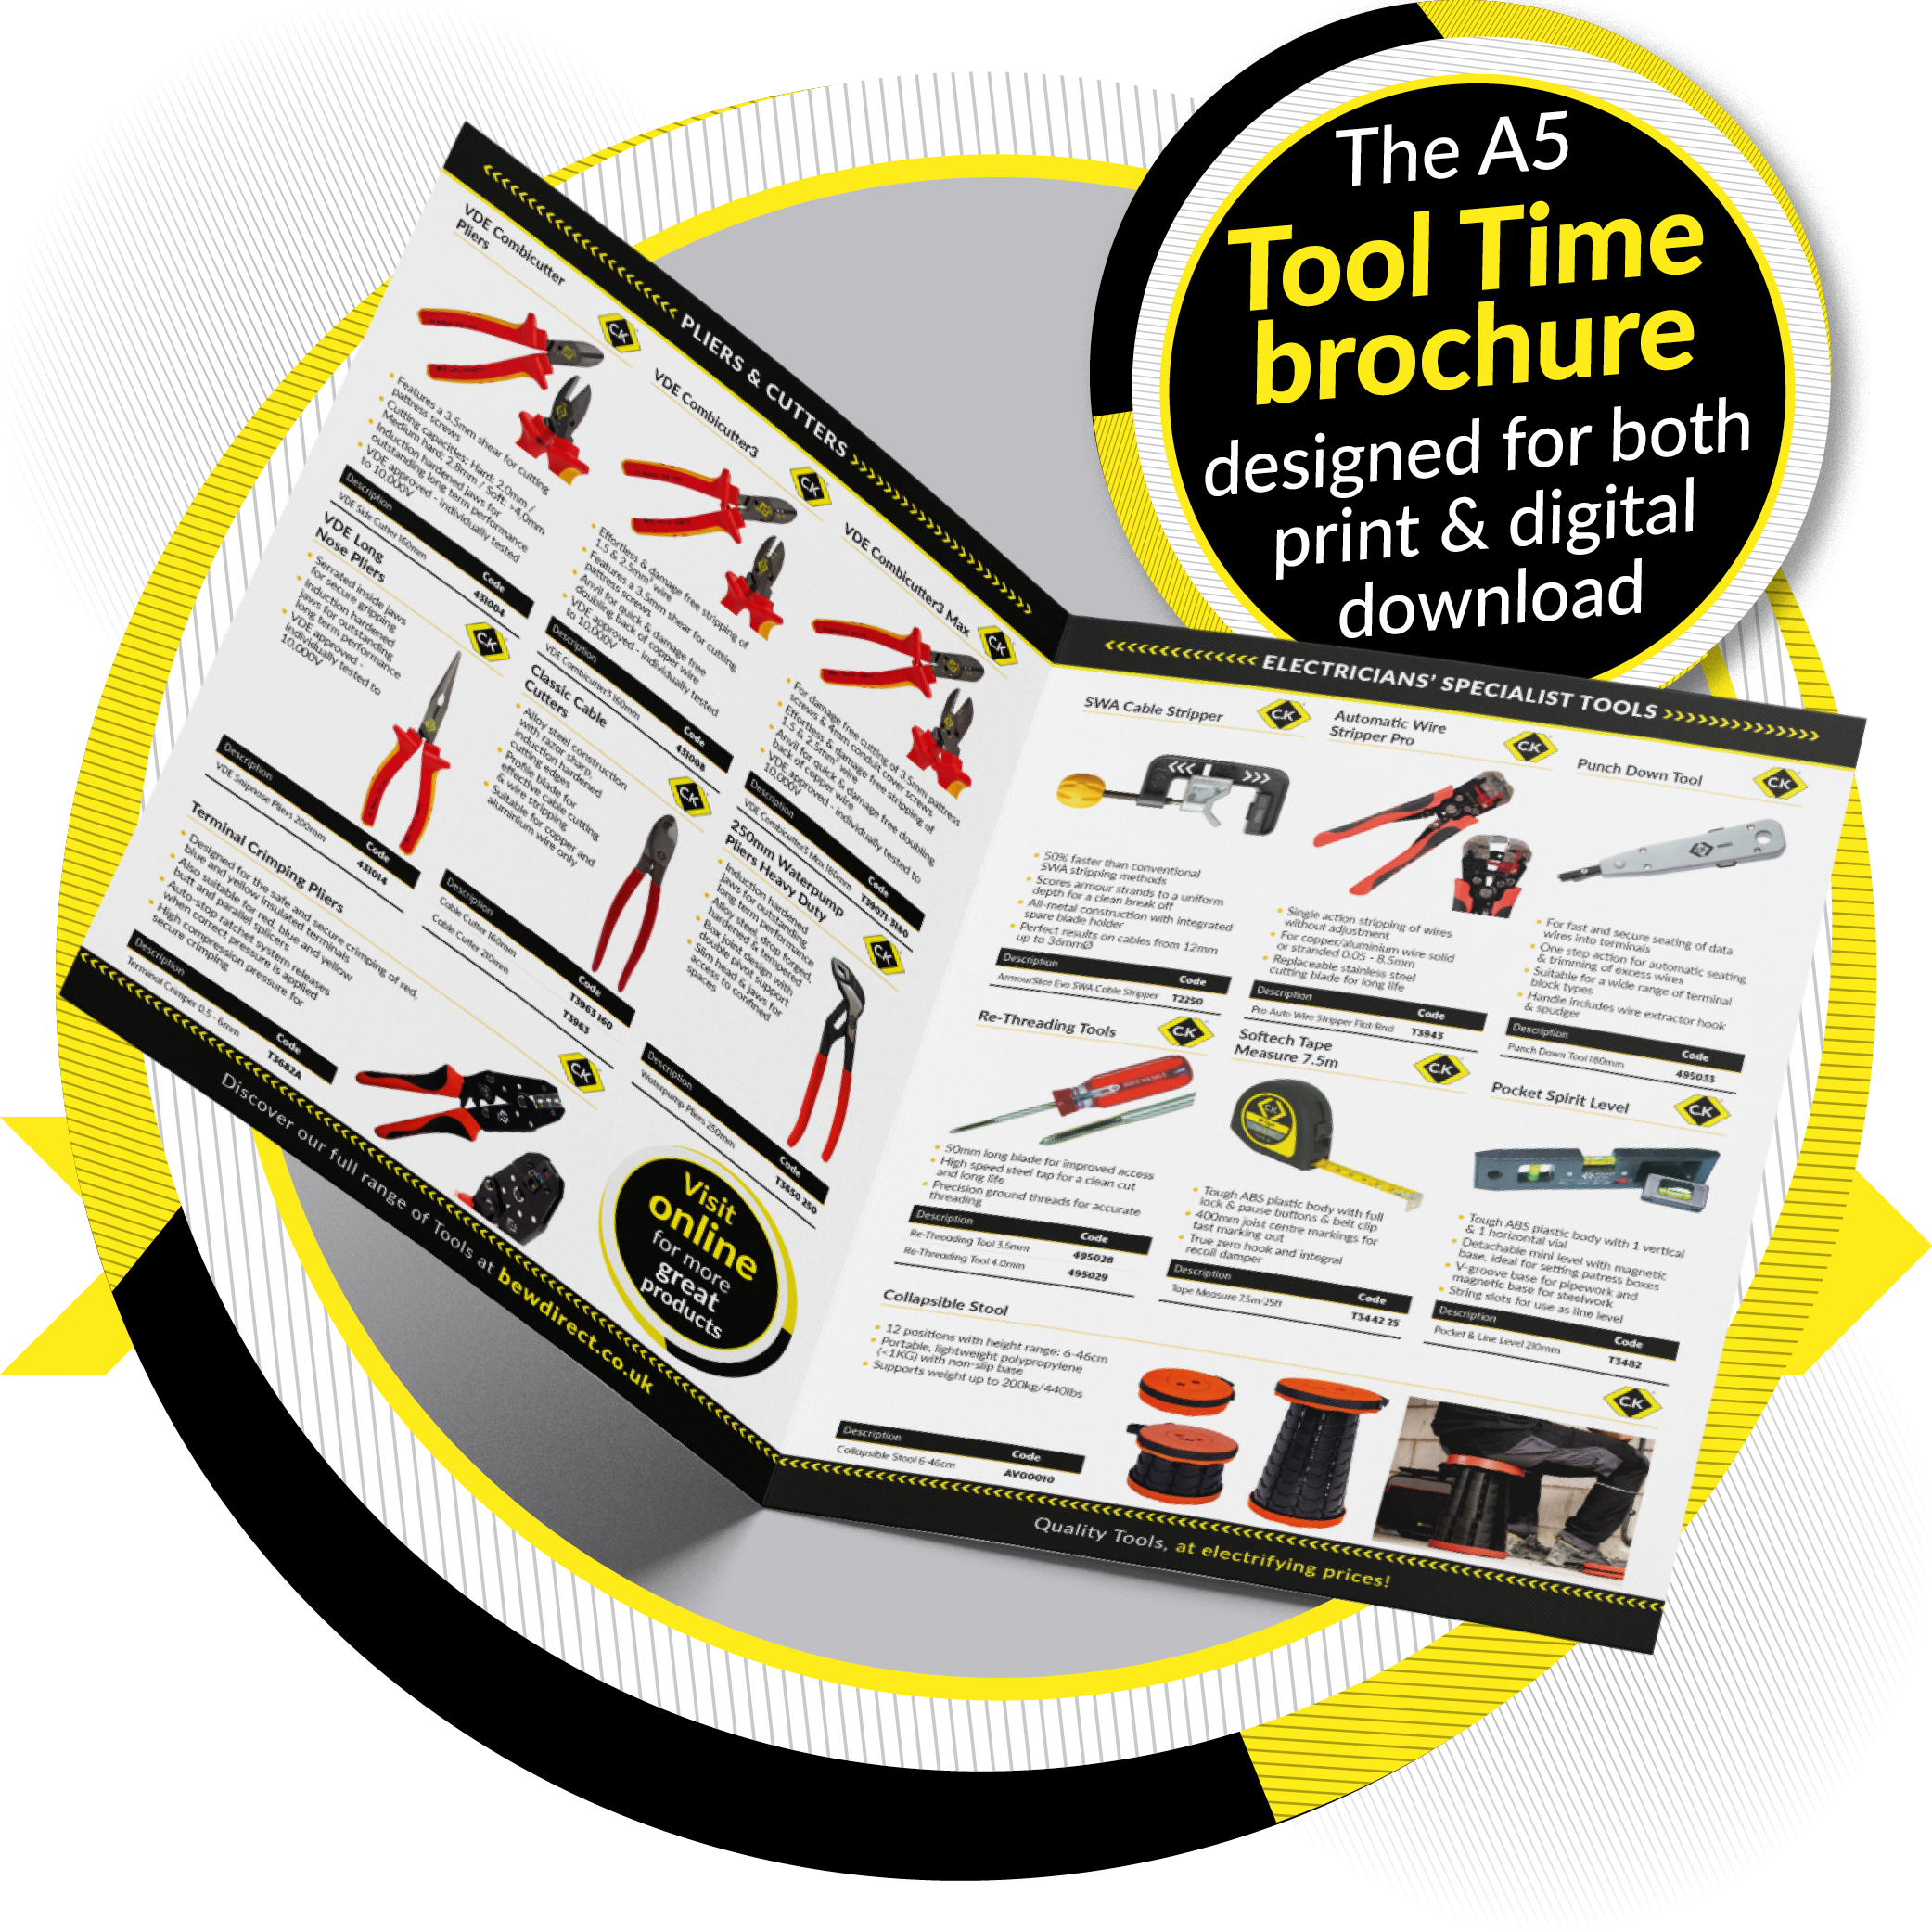 BEW's 'Tool Time' leaflet promoting their stocked range of C.K Tools products